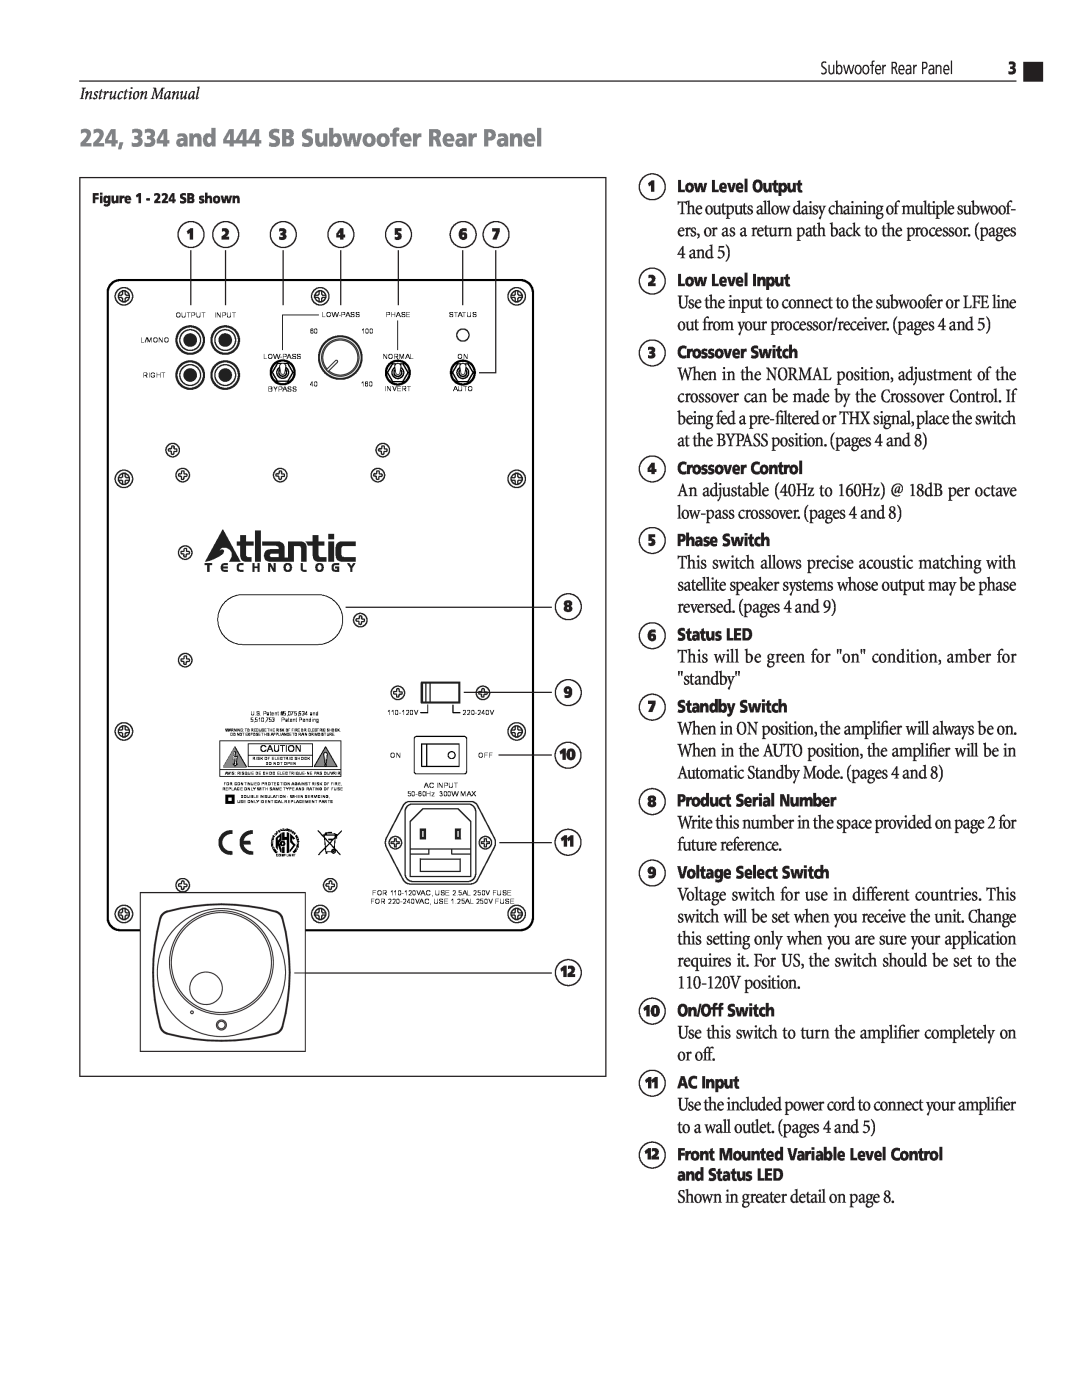 Atlantic Technology 334 SB, 224 SB 224, 334 and 444 SB Subwoofer Rear Panel, Shown in greater detail on page 